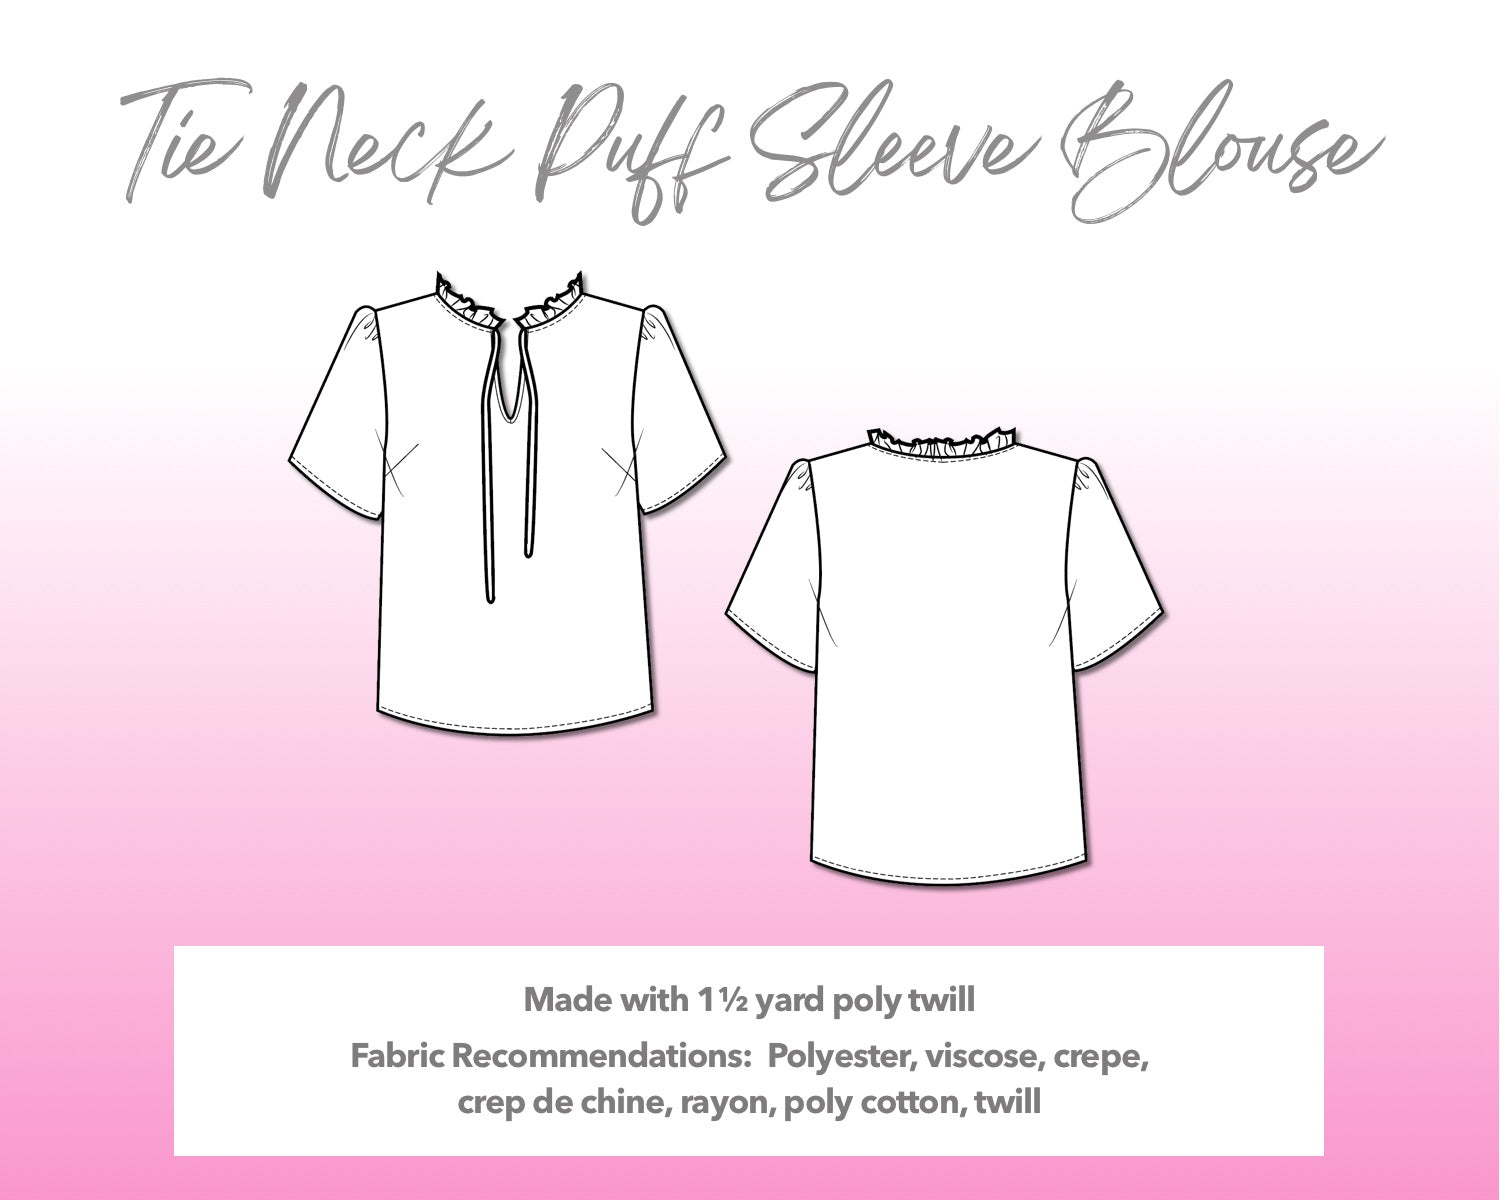 Illustration and detailed description for Tie Neck Puff Sleeve Blouse sewing pattern.